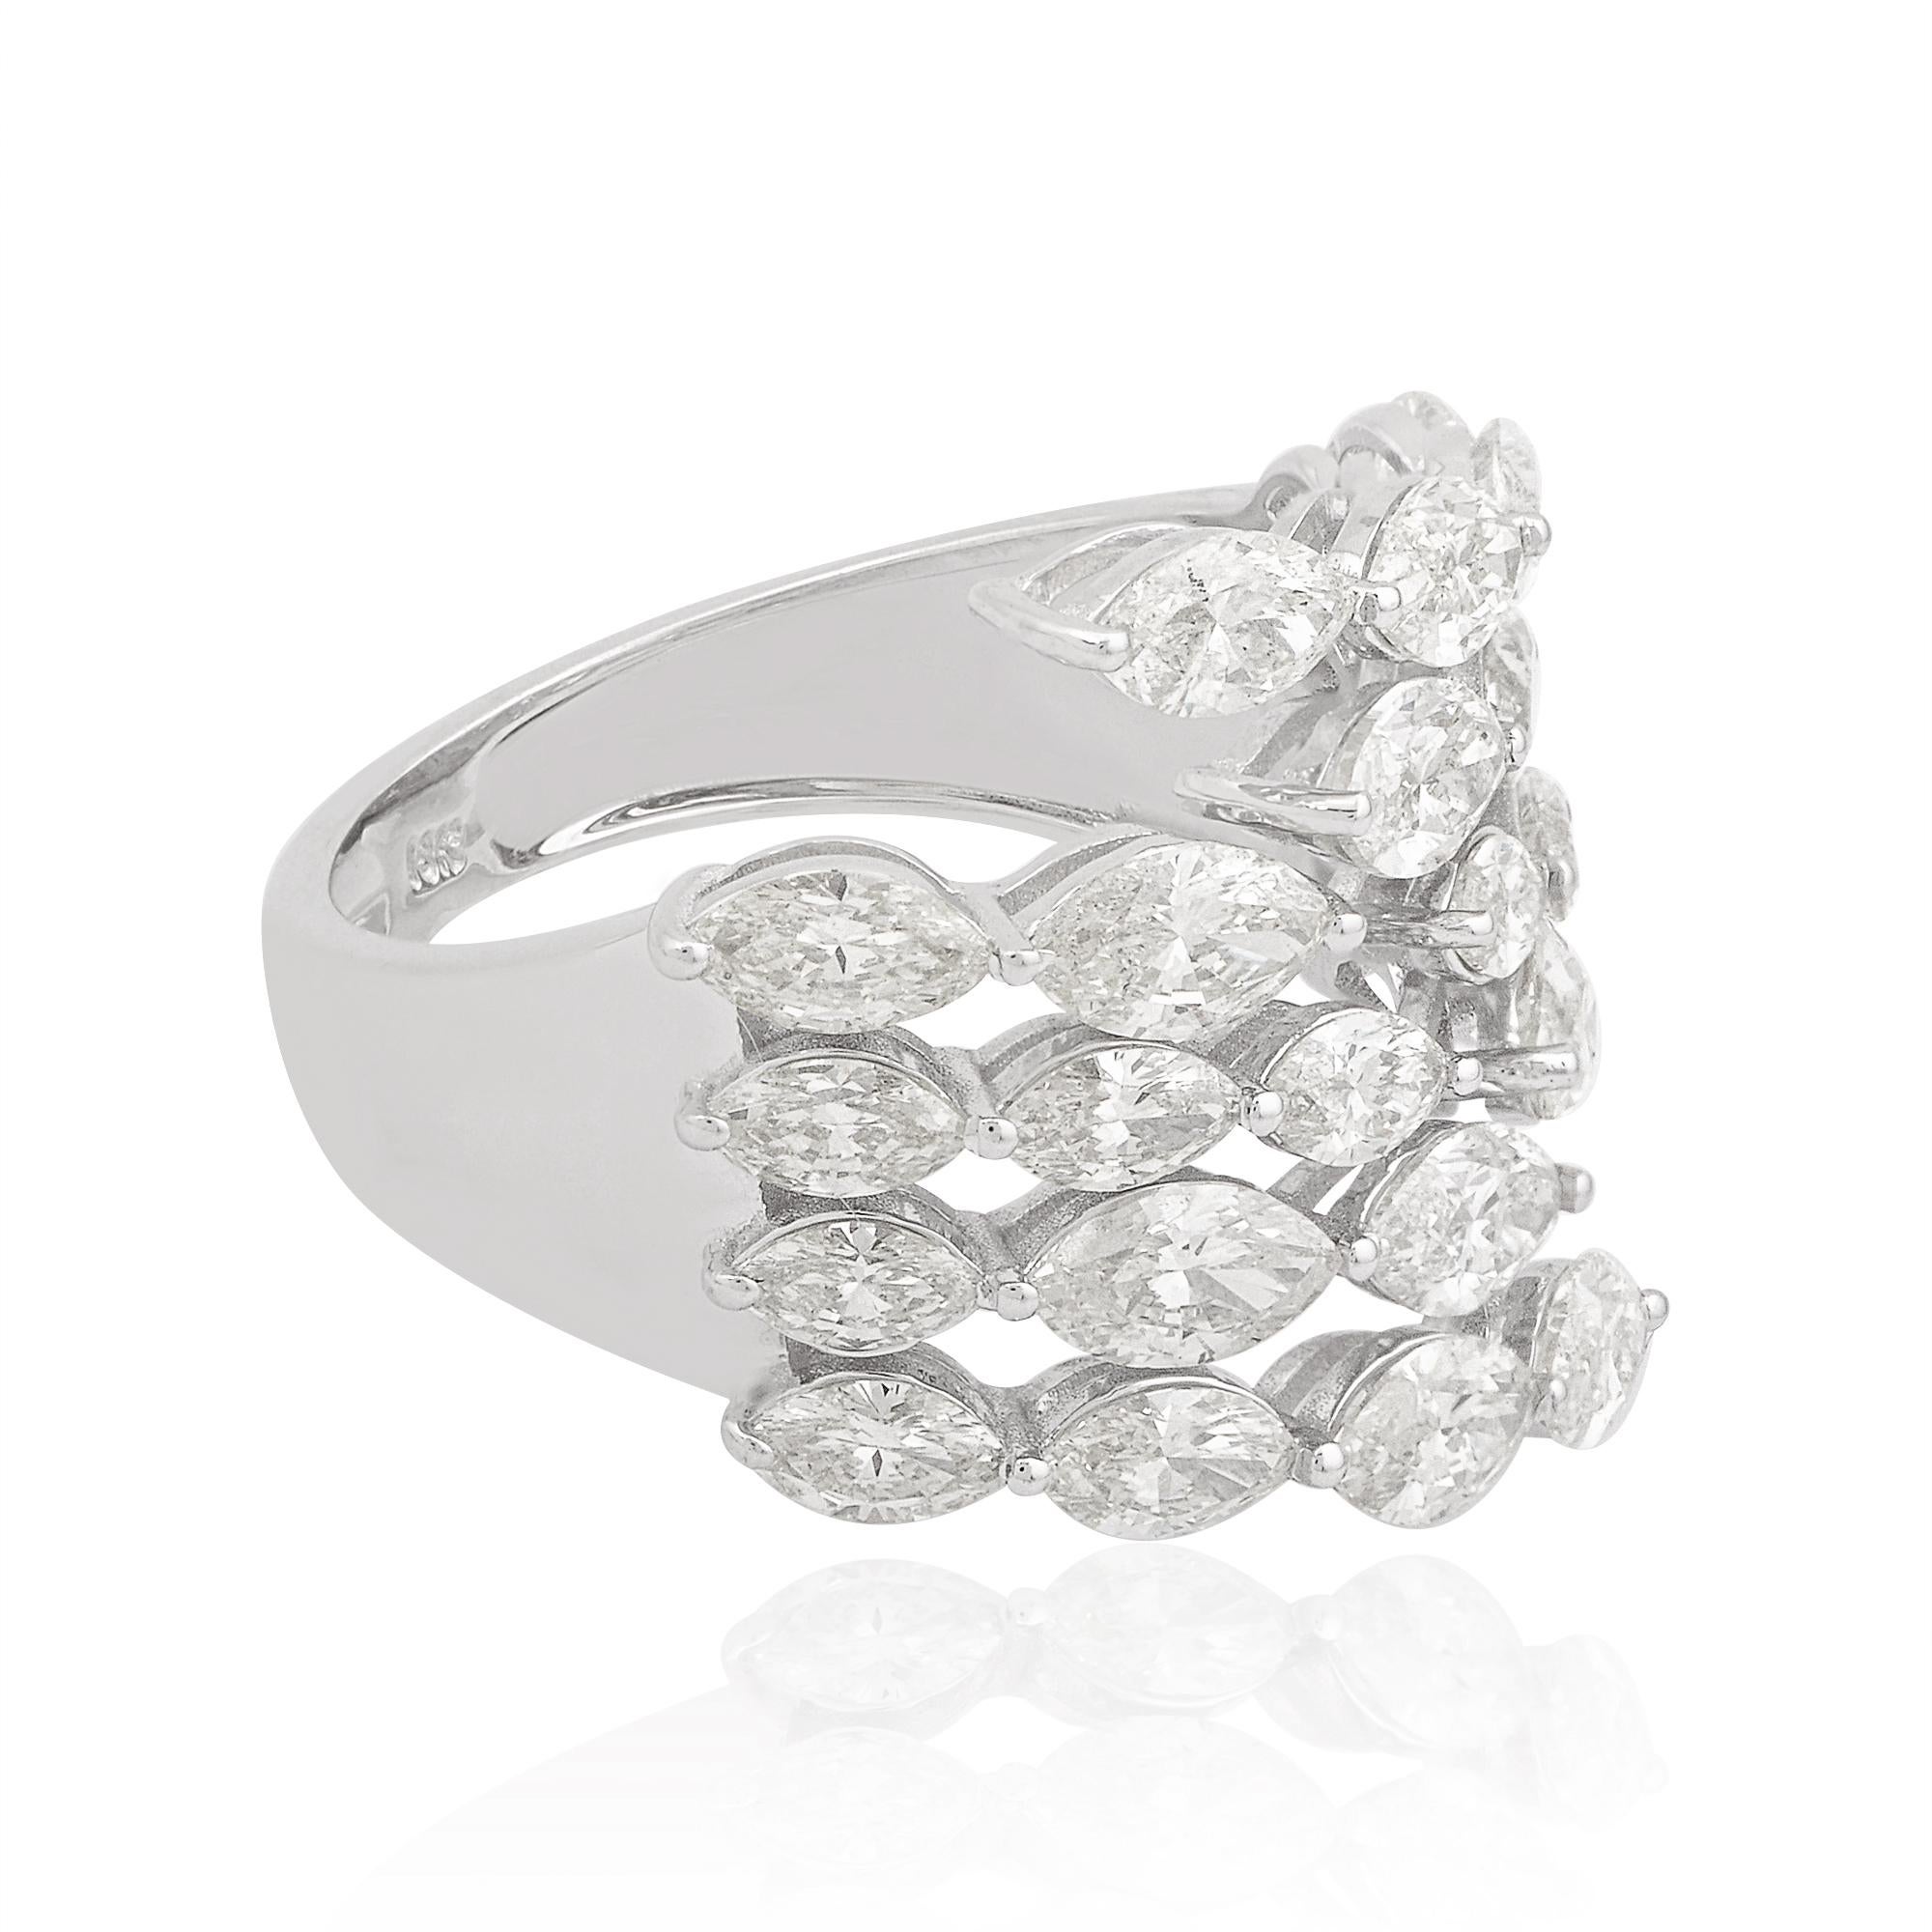 Crafted in solid 18k Gold, this ring features a cluster of sparkling diamonds, creating a truly dazzling effect. The diamonds are expertly set in a secure prong setting, ensuring that they stay in place and catch the light at every angle.

This is a